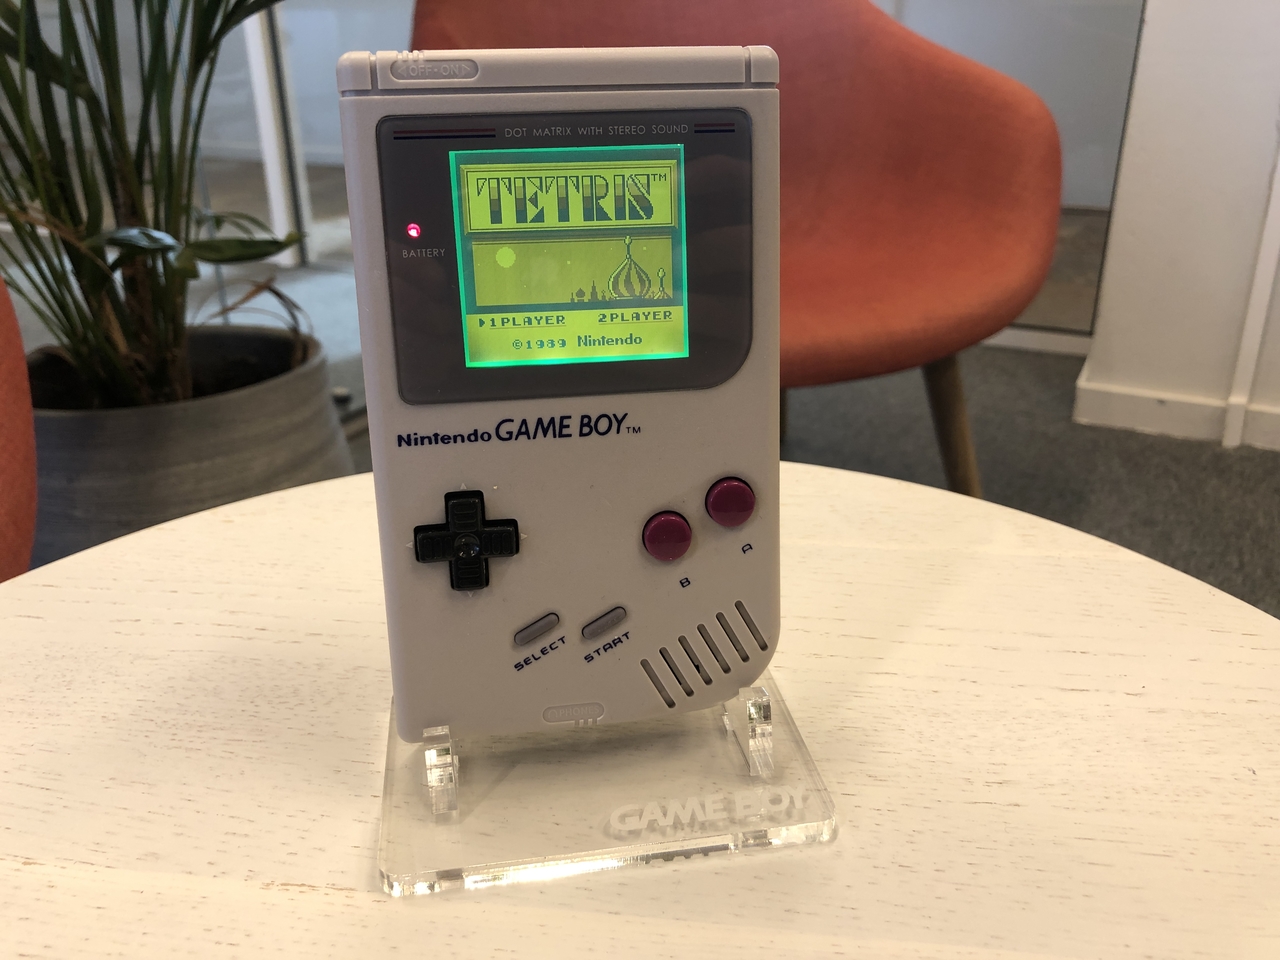 Gameboy Classic Yellow Backlight Edition Tetris Pack - Gameboy Advance Hardware - 3